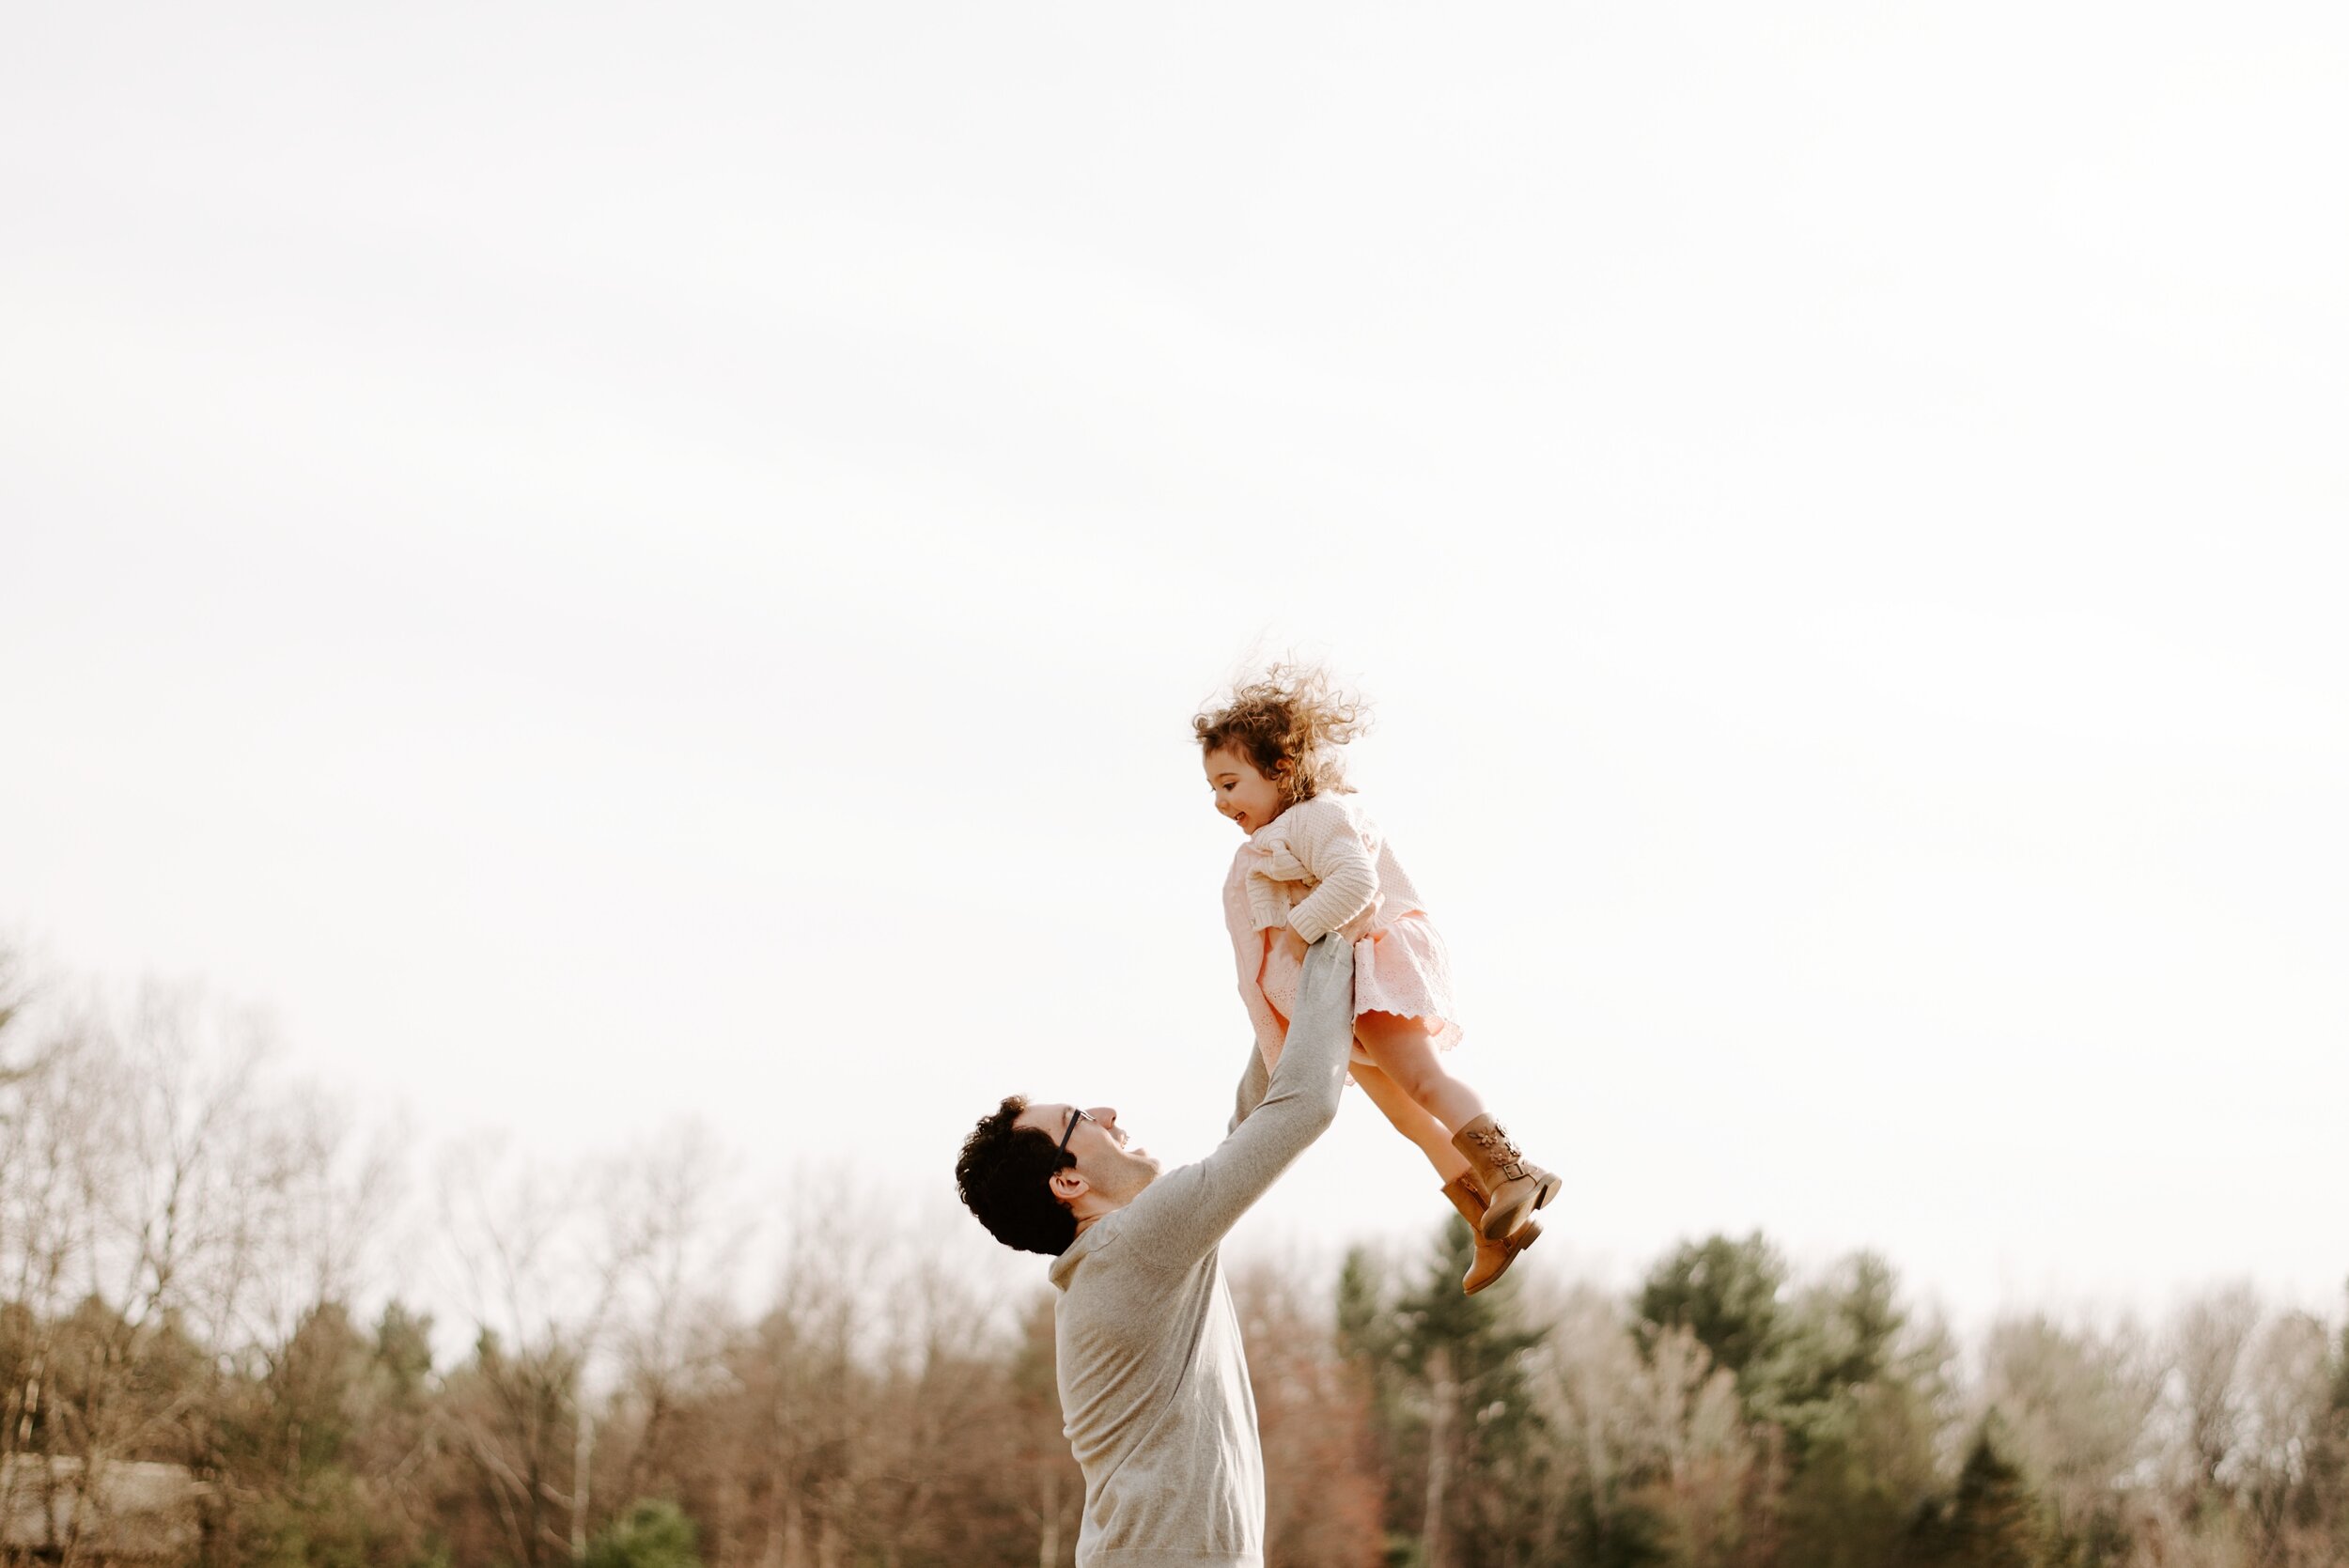 Connecticut New England Outdoors Woodsy Field Family Dad Playing with Daughter Lifestyle Portrait.jpg